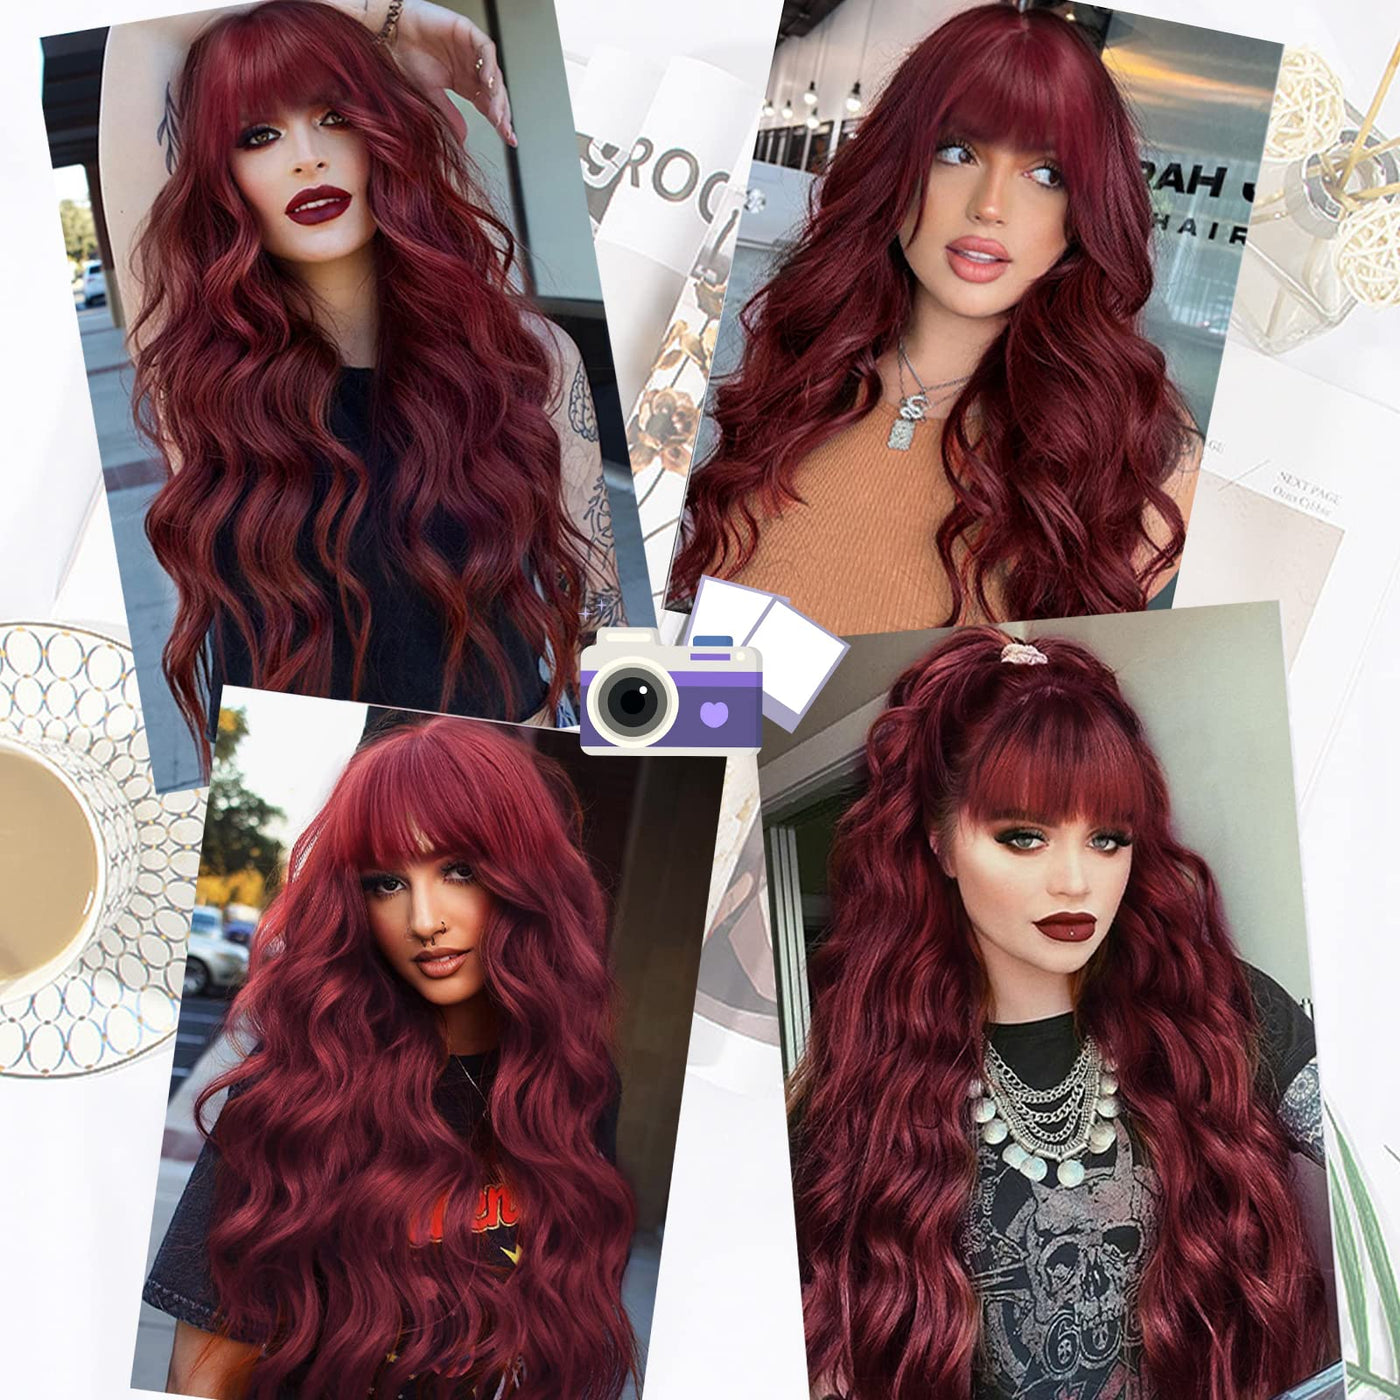 LKQee Long Wig with Bangs Wine Red Wavy Wigs for Women Synthetic Heat Resistant Fibre Burgundy Wigs for Girls Daily Party Use